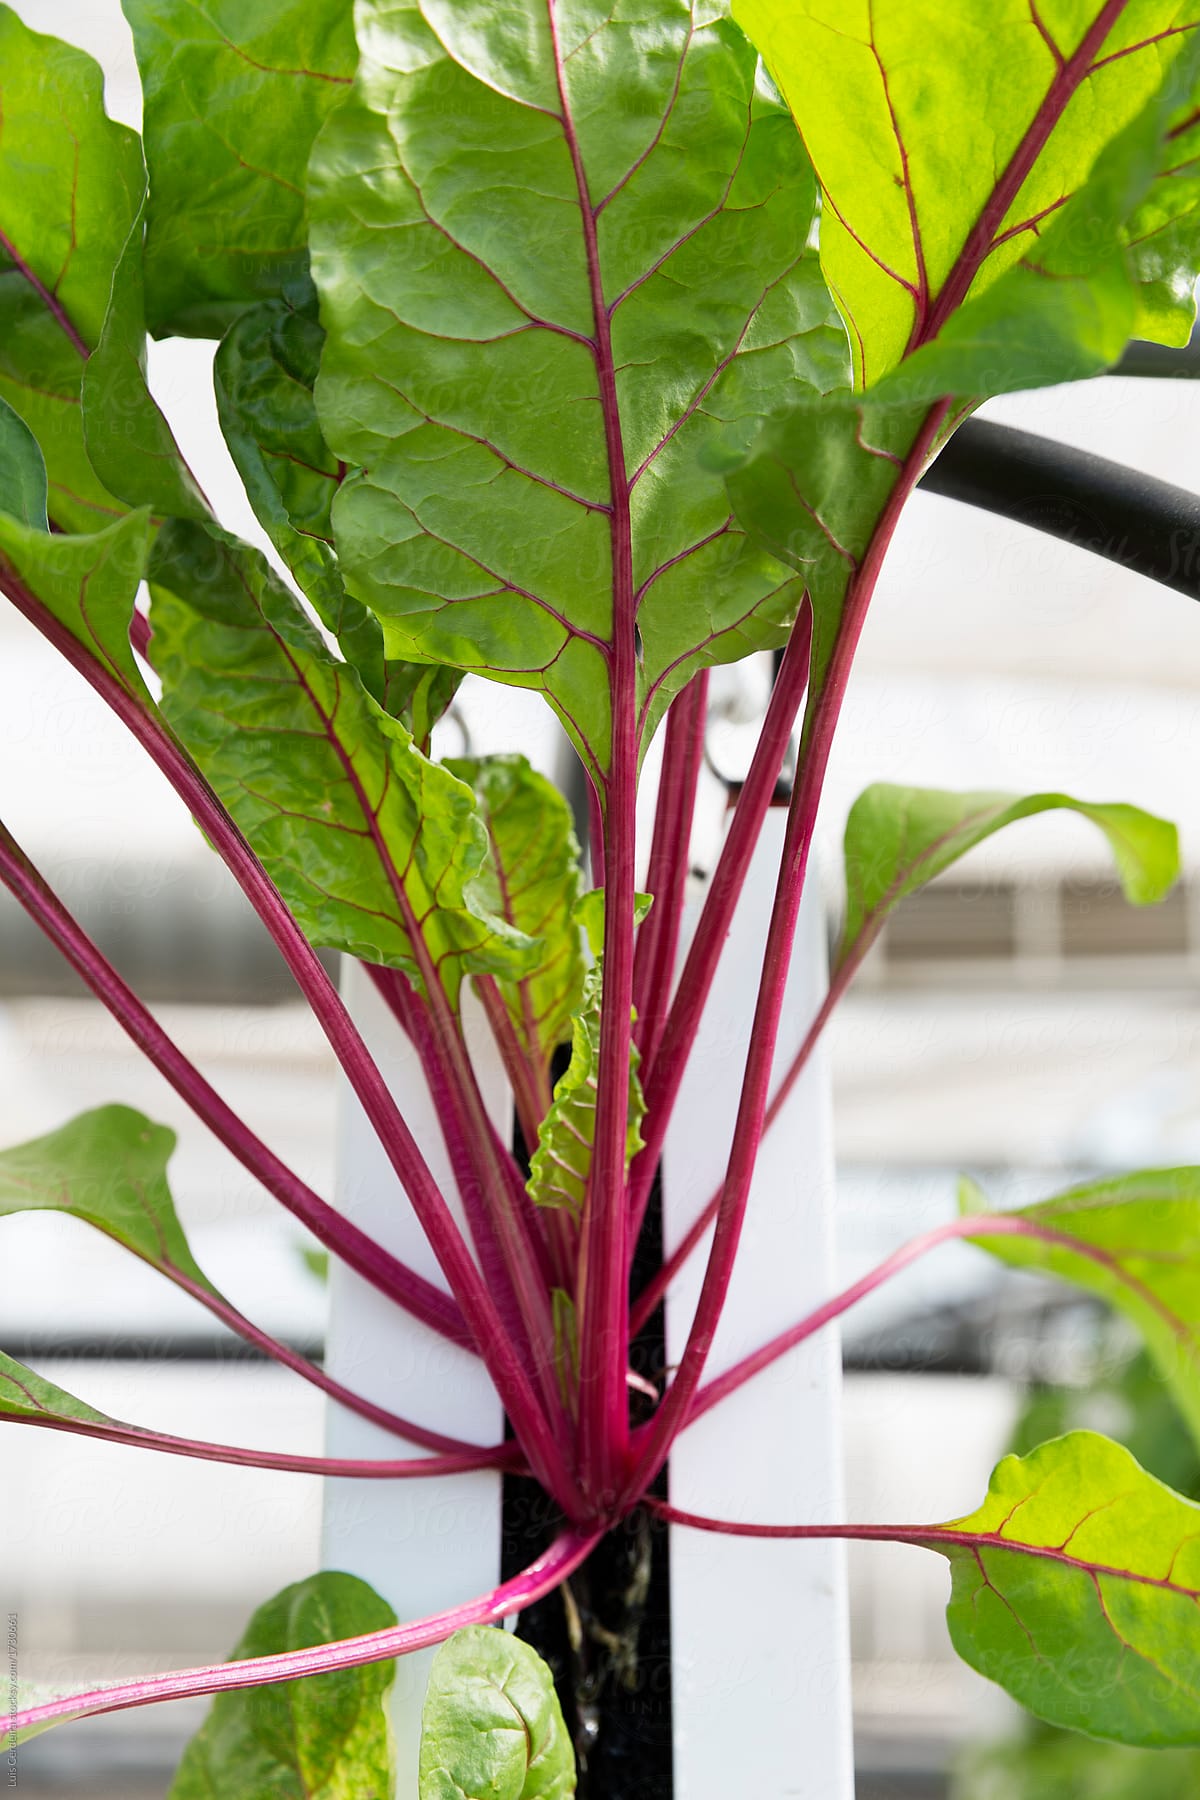 Red chard plants growing on an hydroponic tower